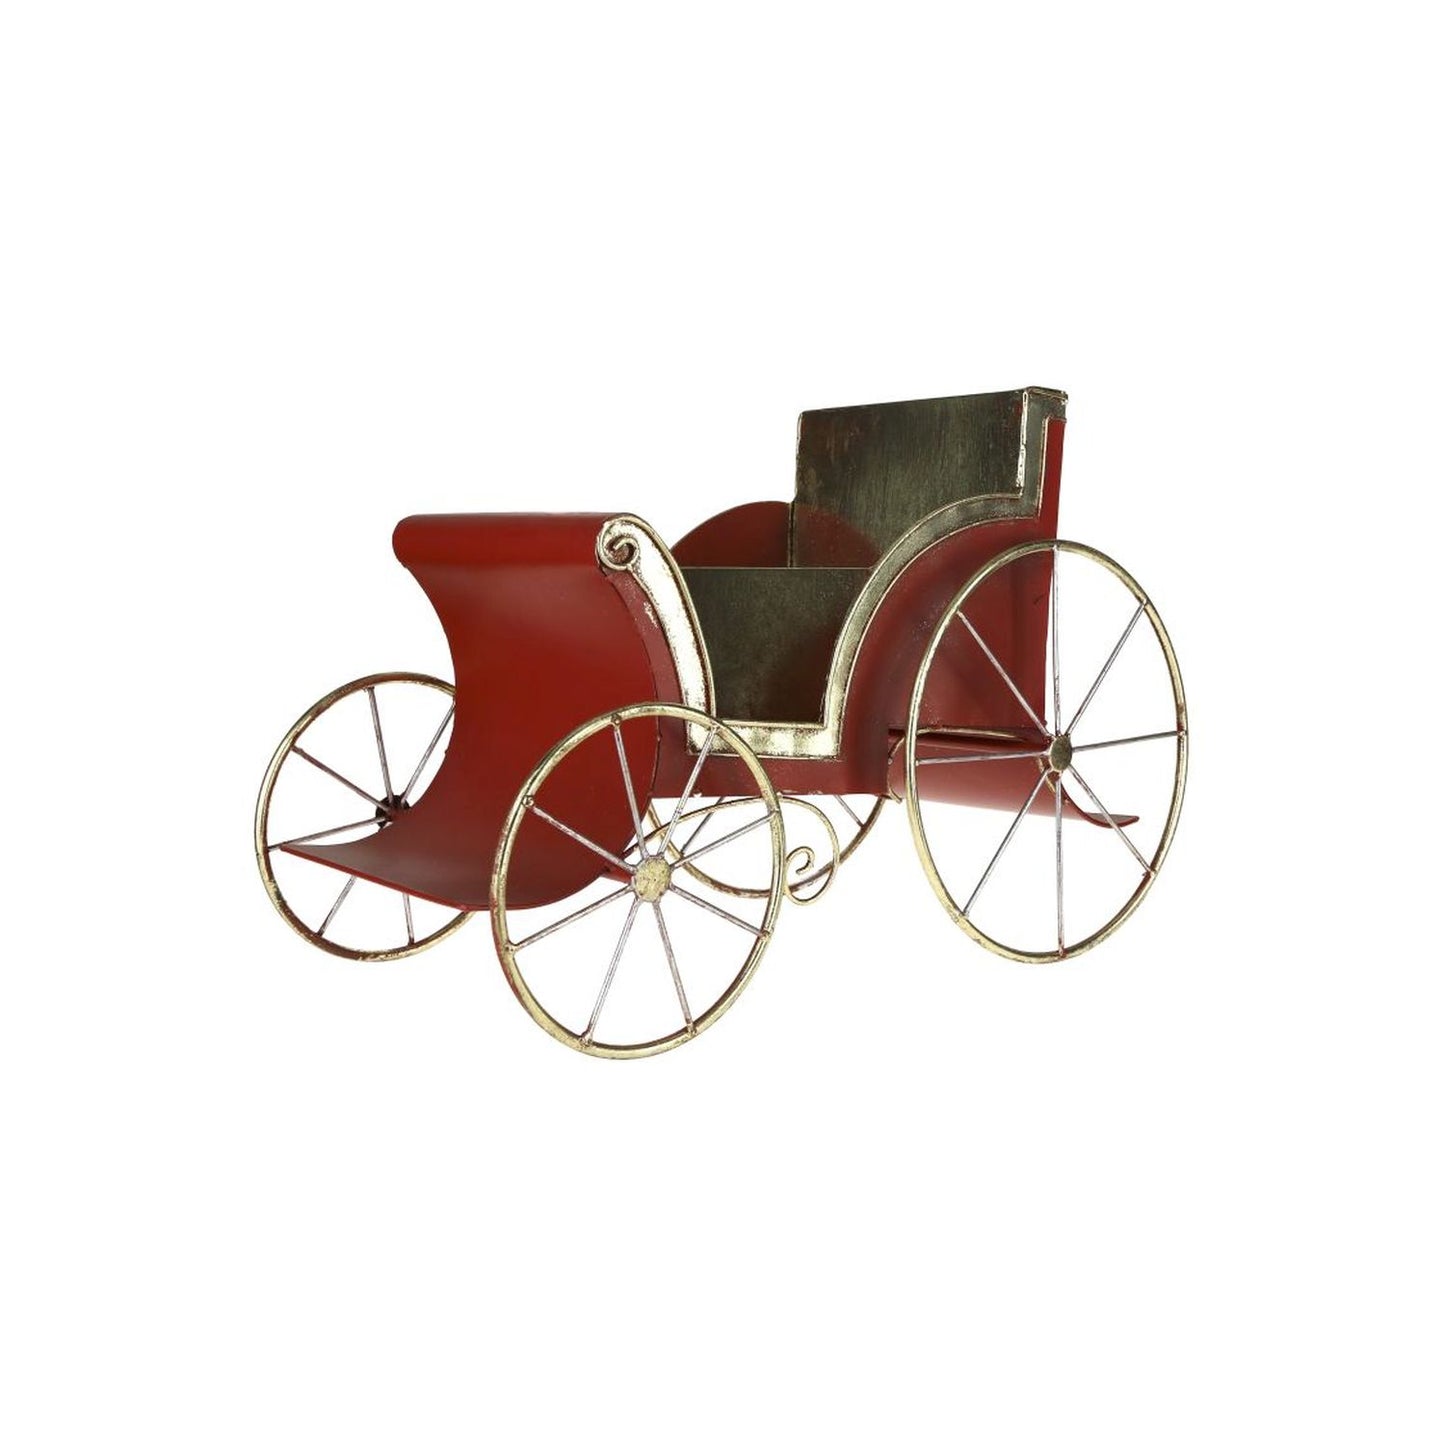 Mark Roberts 2022 Carriage - 23 X 17.5 Inches, Red